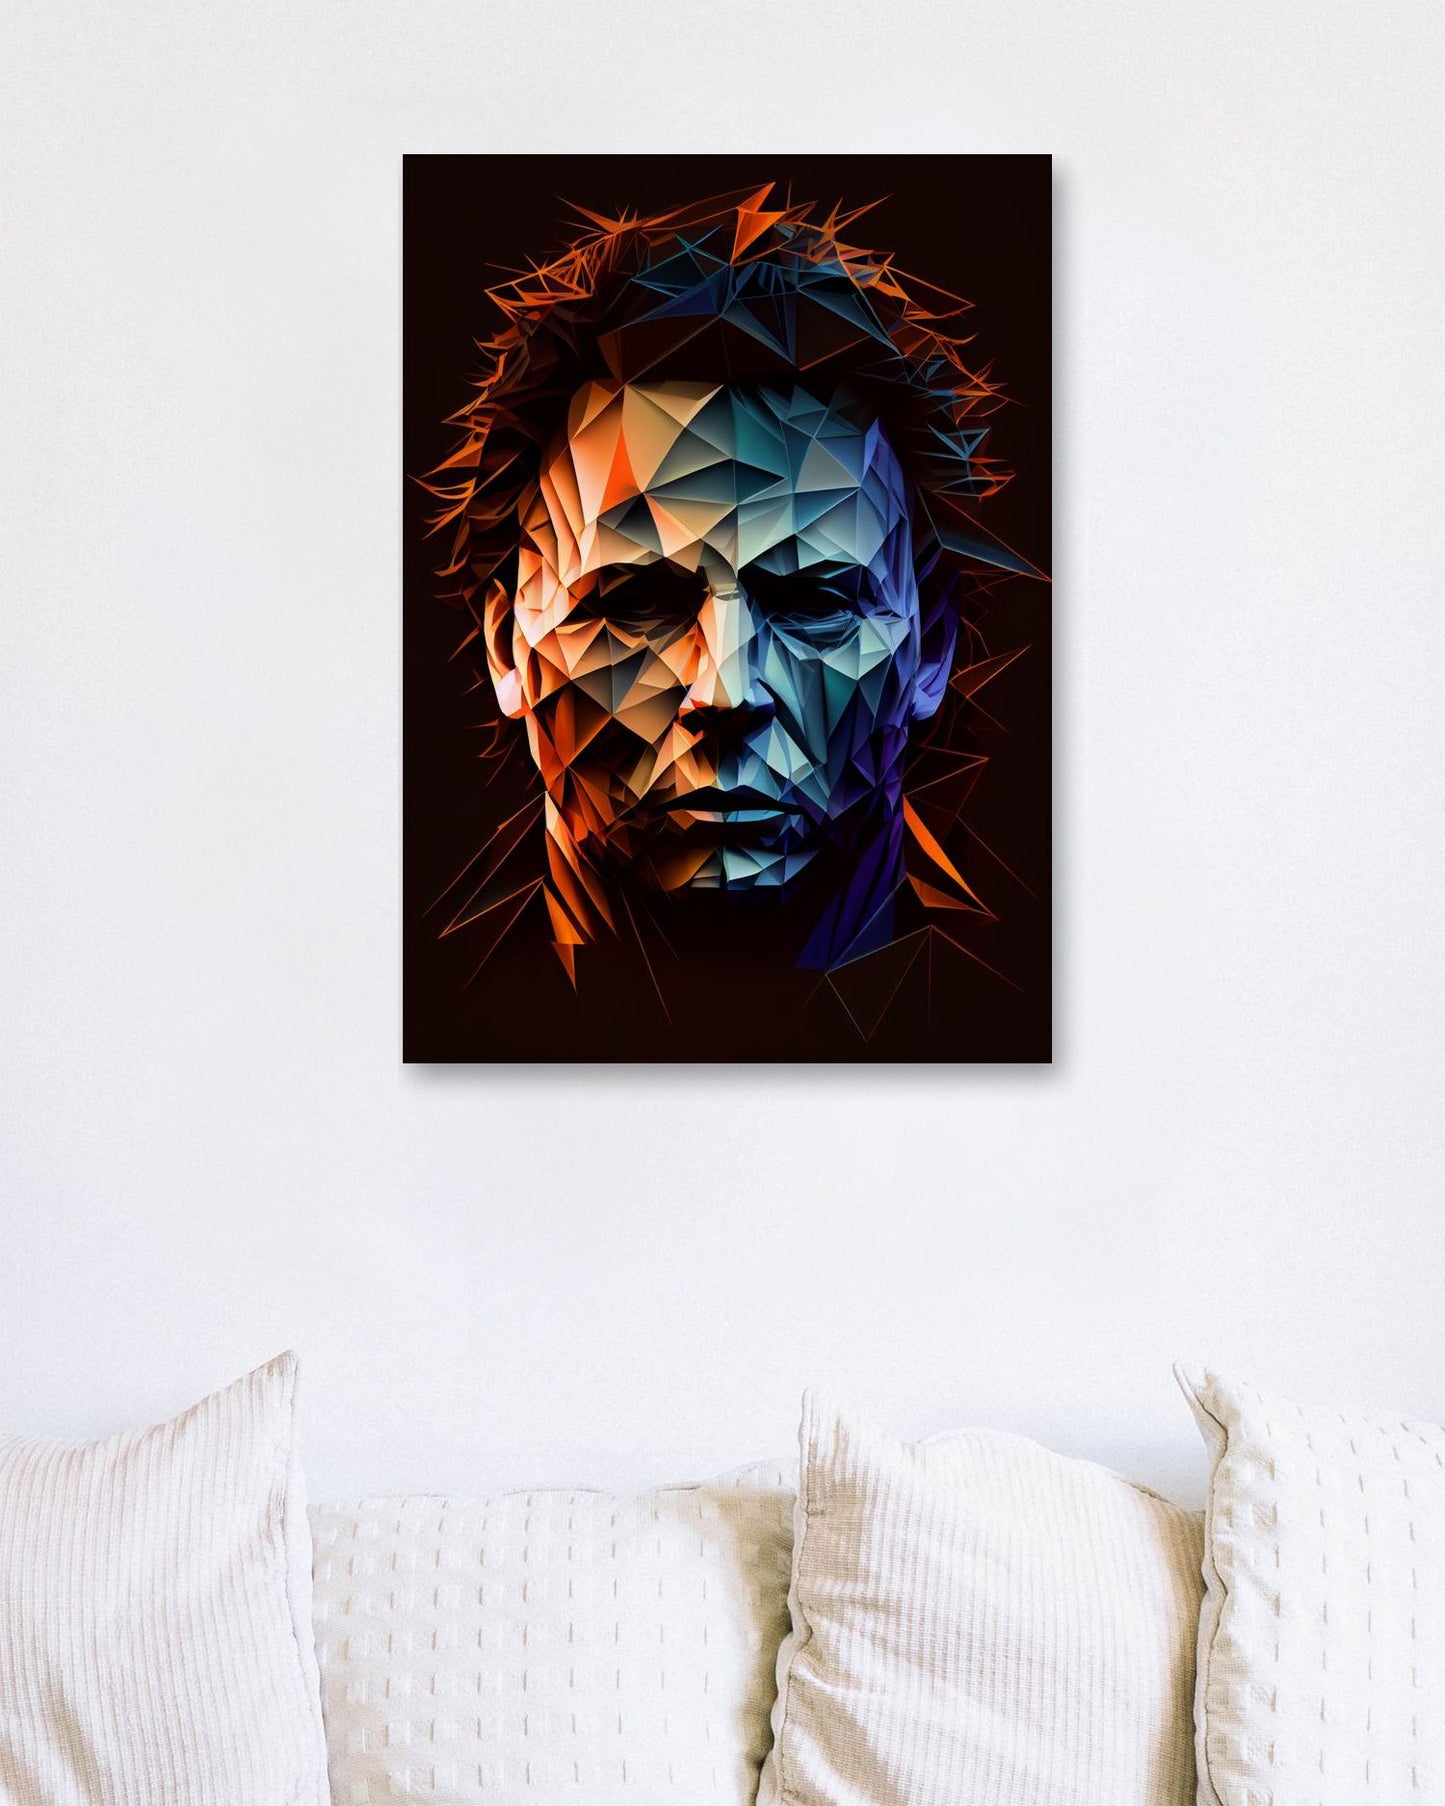 Michael Myers Low Poly - @WpapArtist